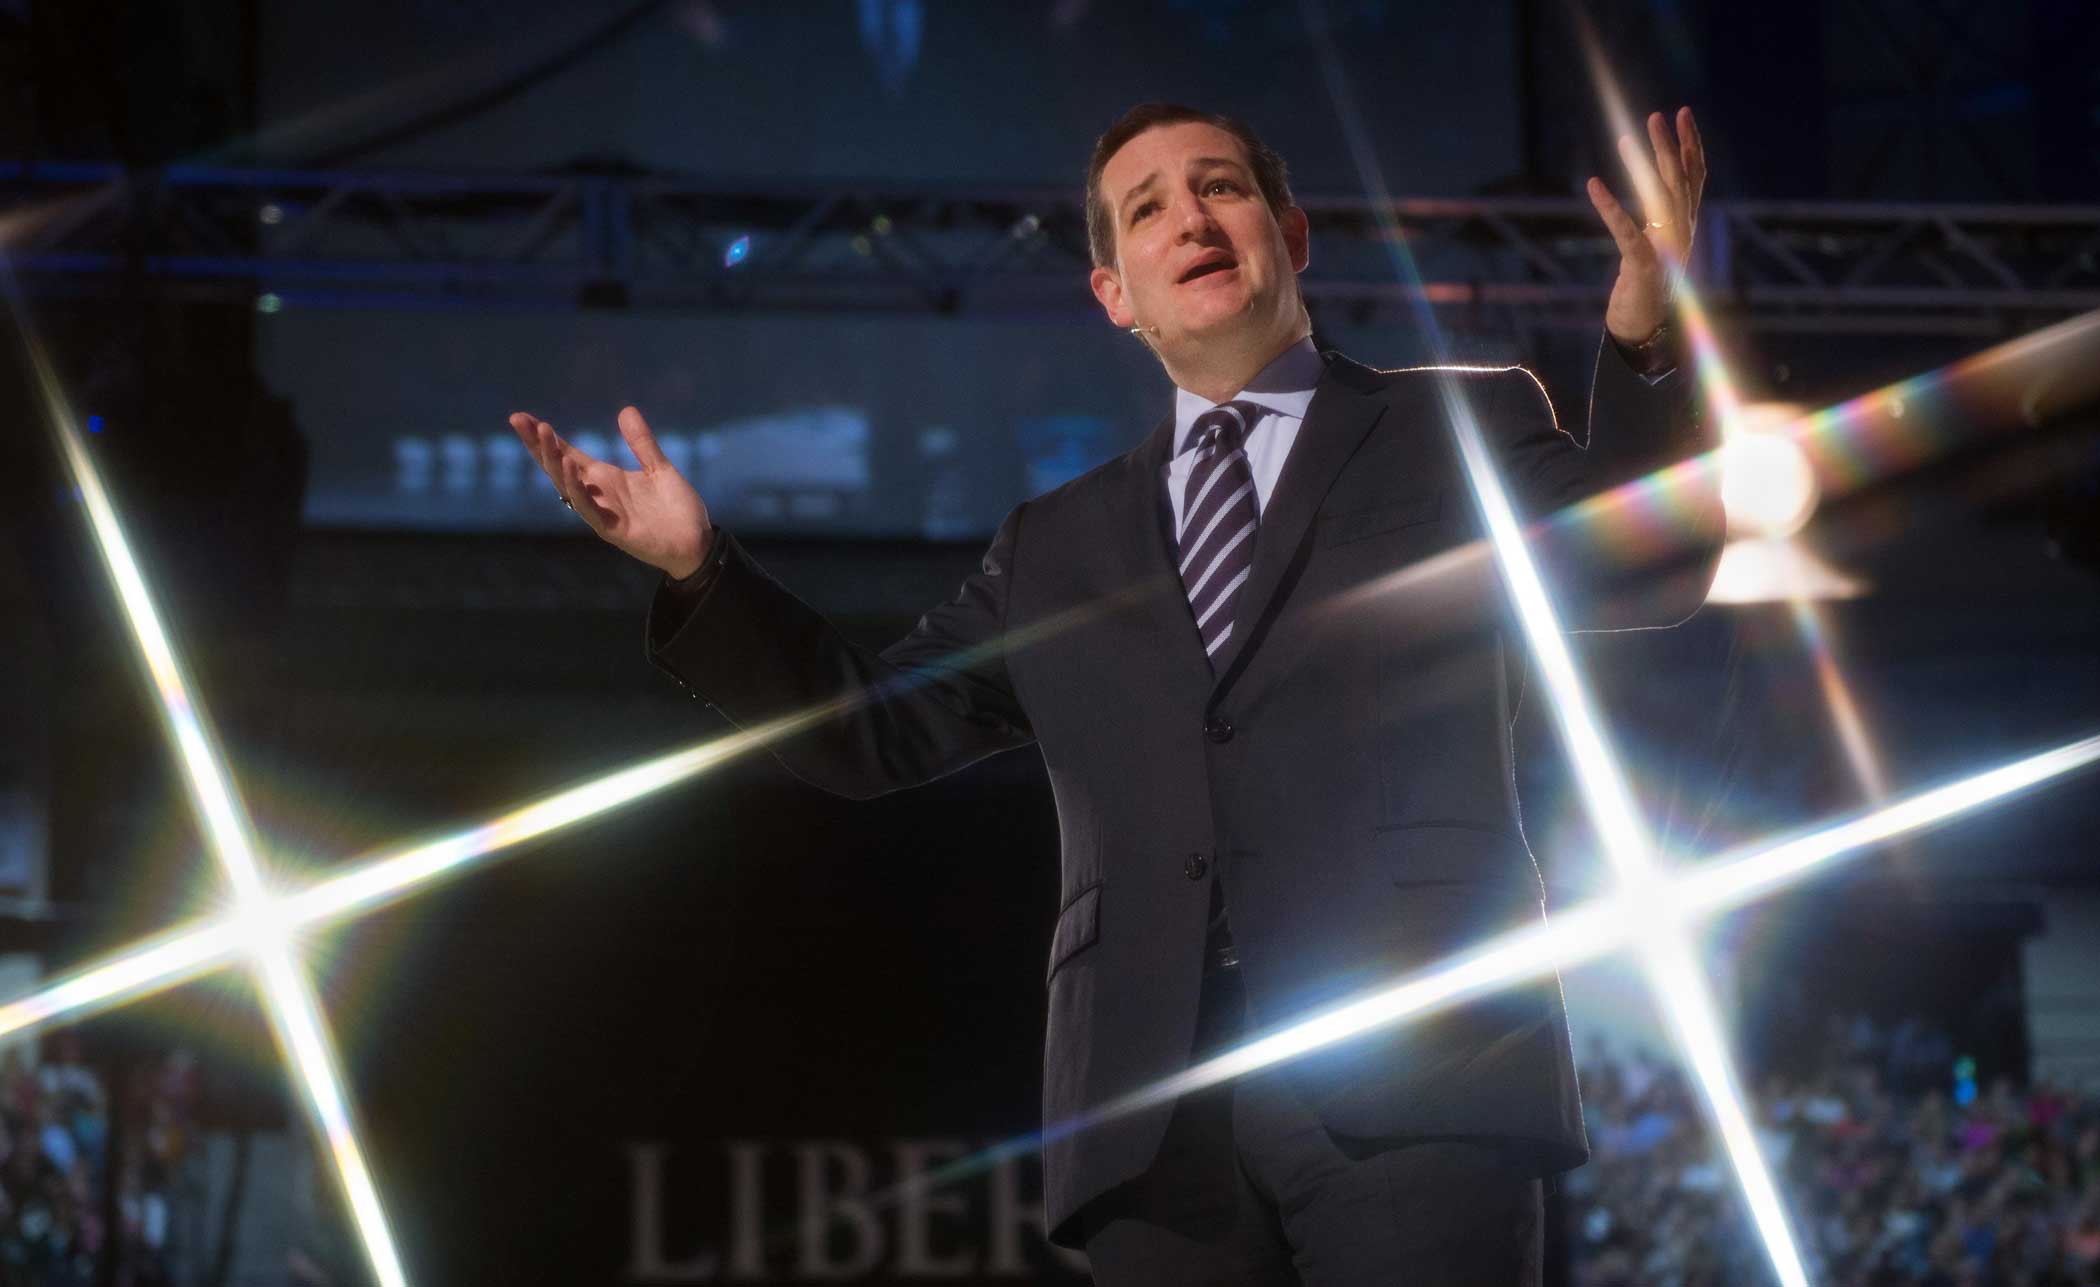 Senator Ted Cruz(R-TX) delivers remarks before announcing his candidacy for the Republican nomination to run for president on March 23, 2015, at Liberty University, in Lynchburg, Virginia.